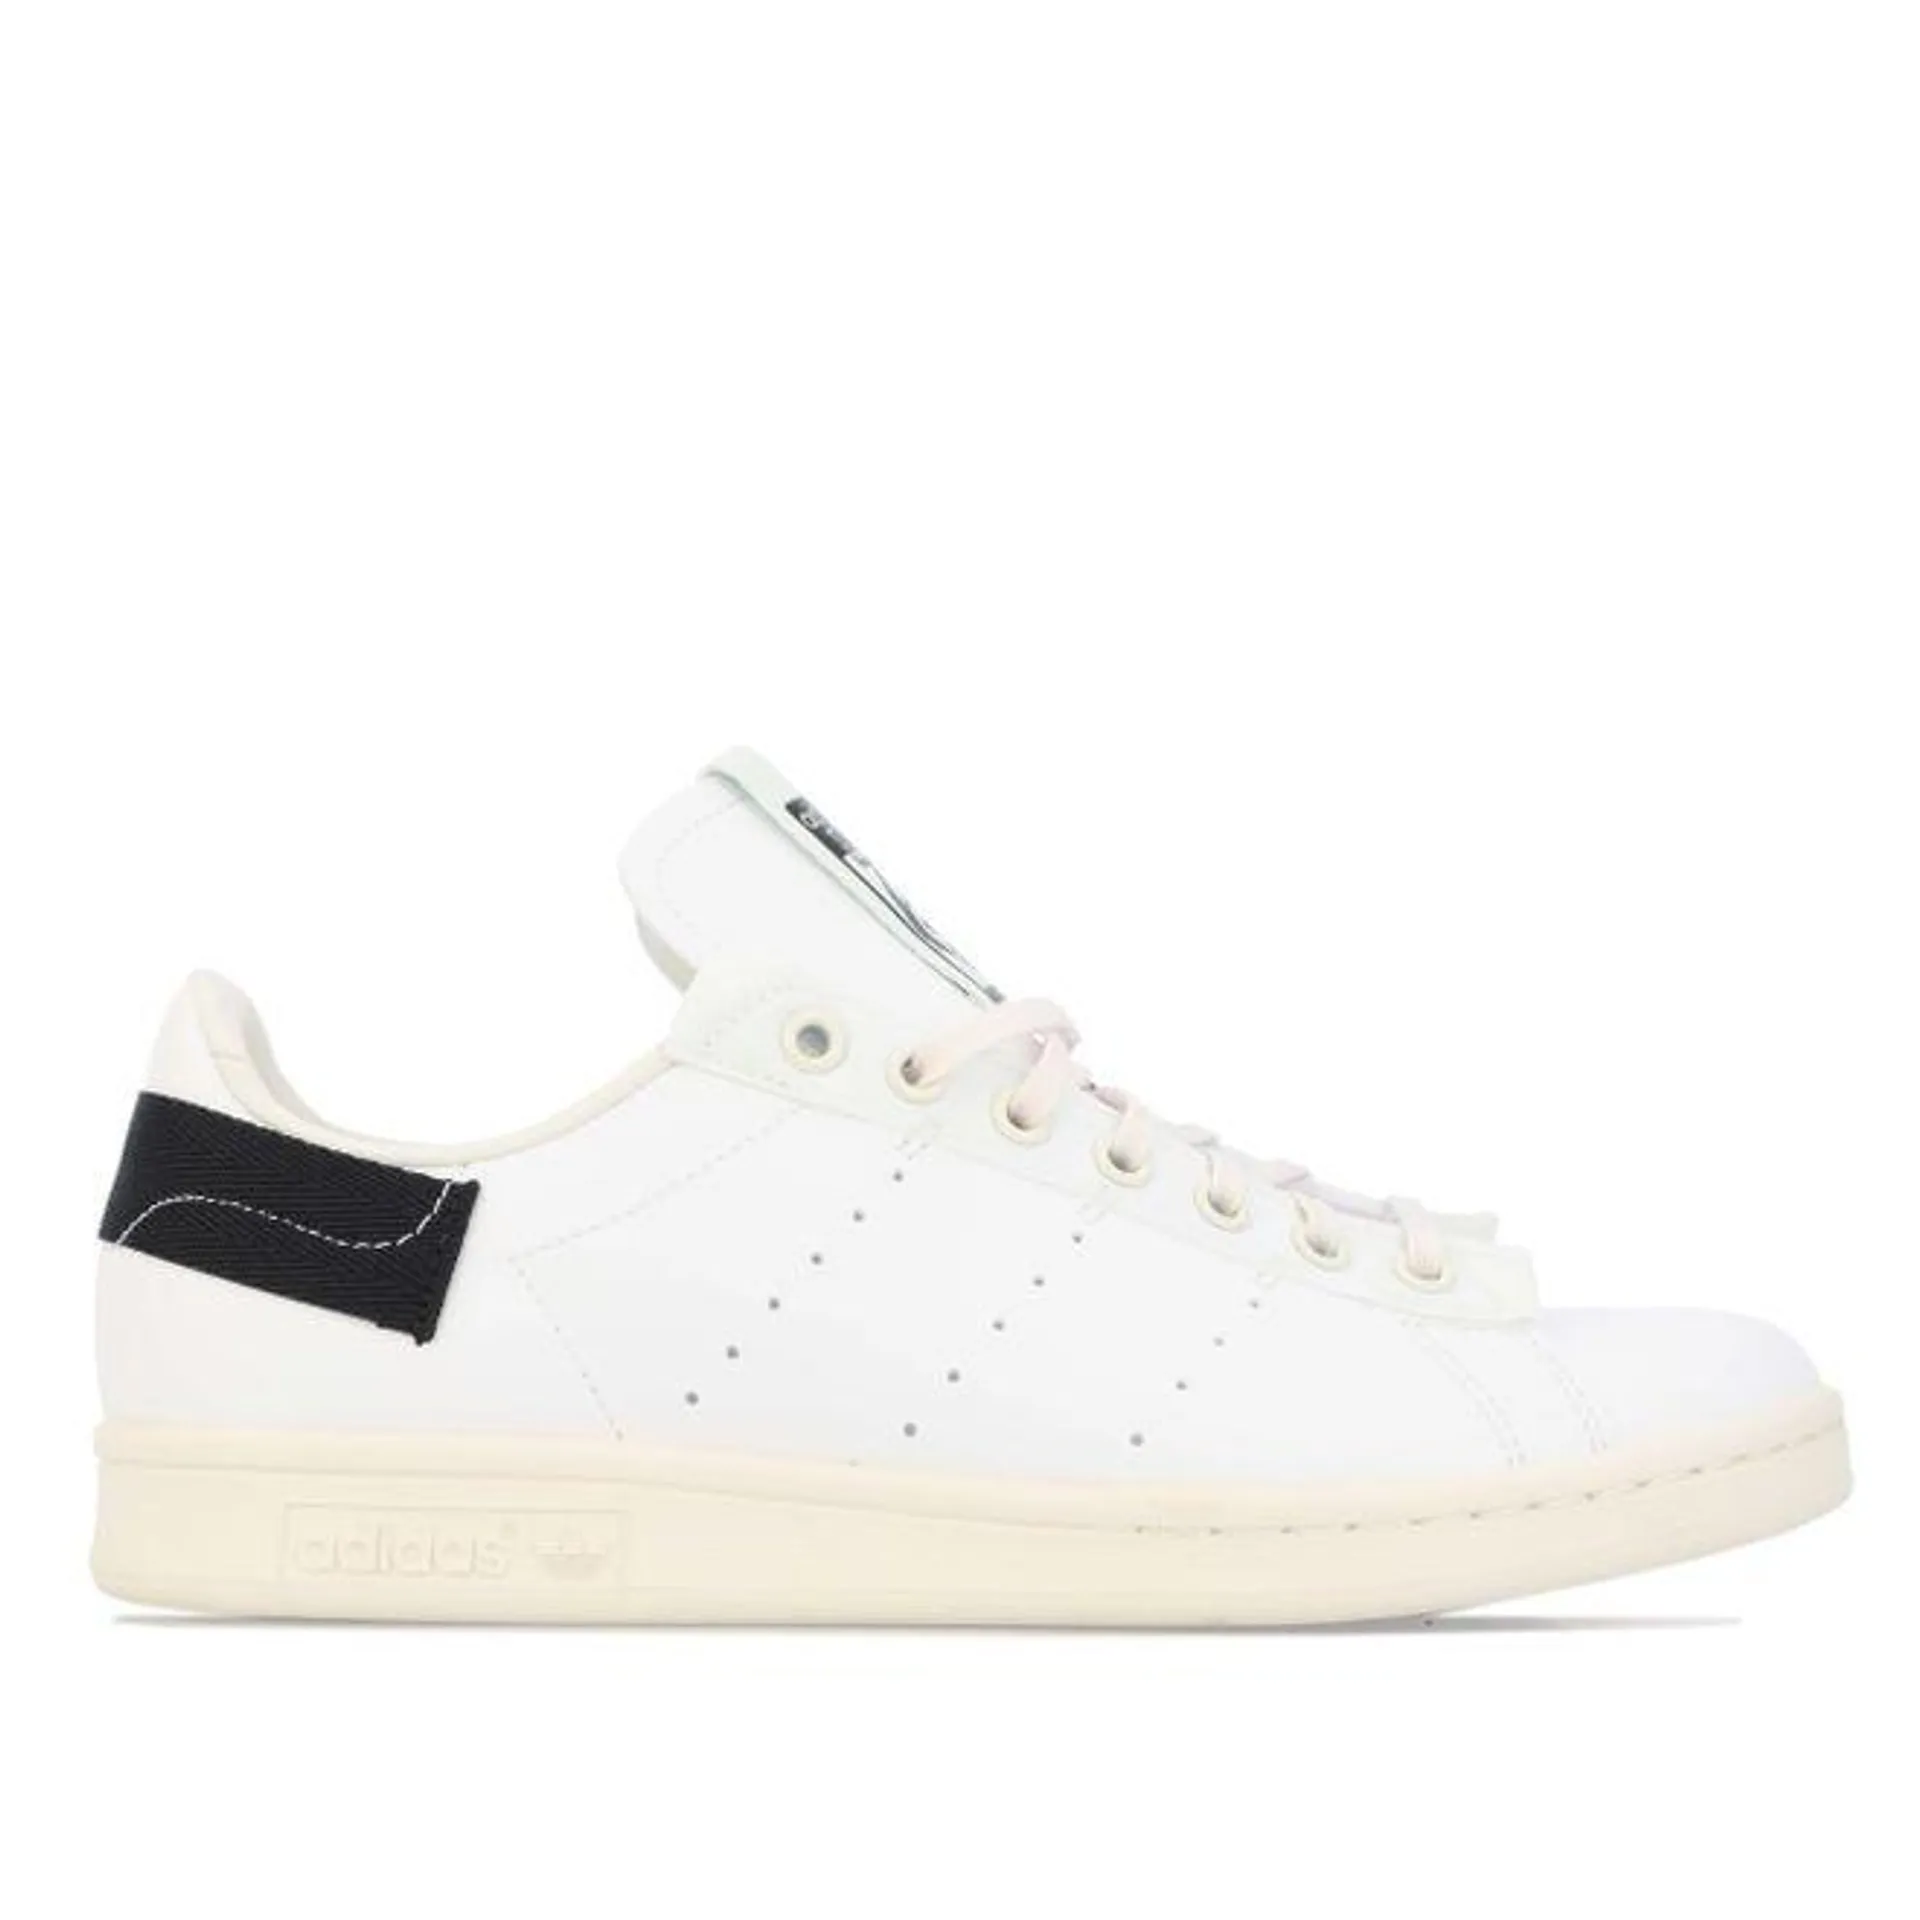 adidas Originals Mens Stan Smith Parley Trainers in White